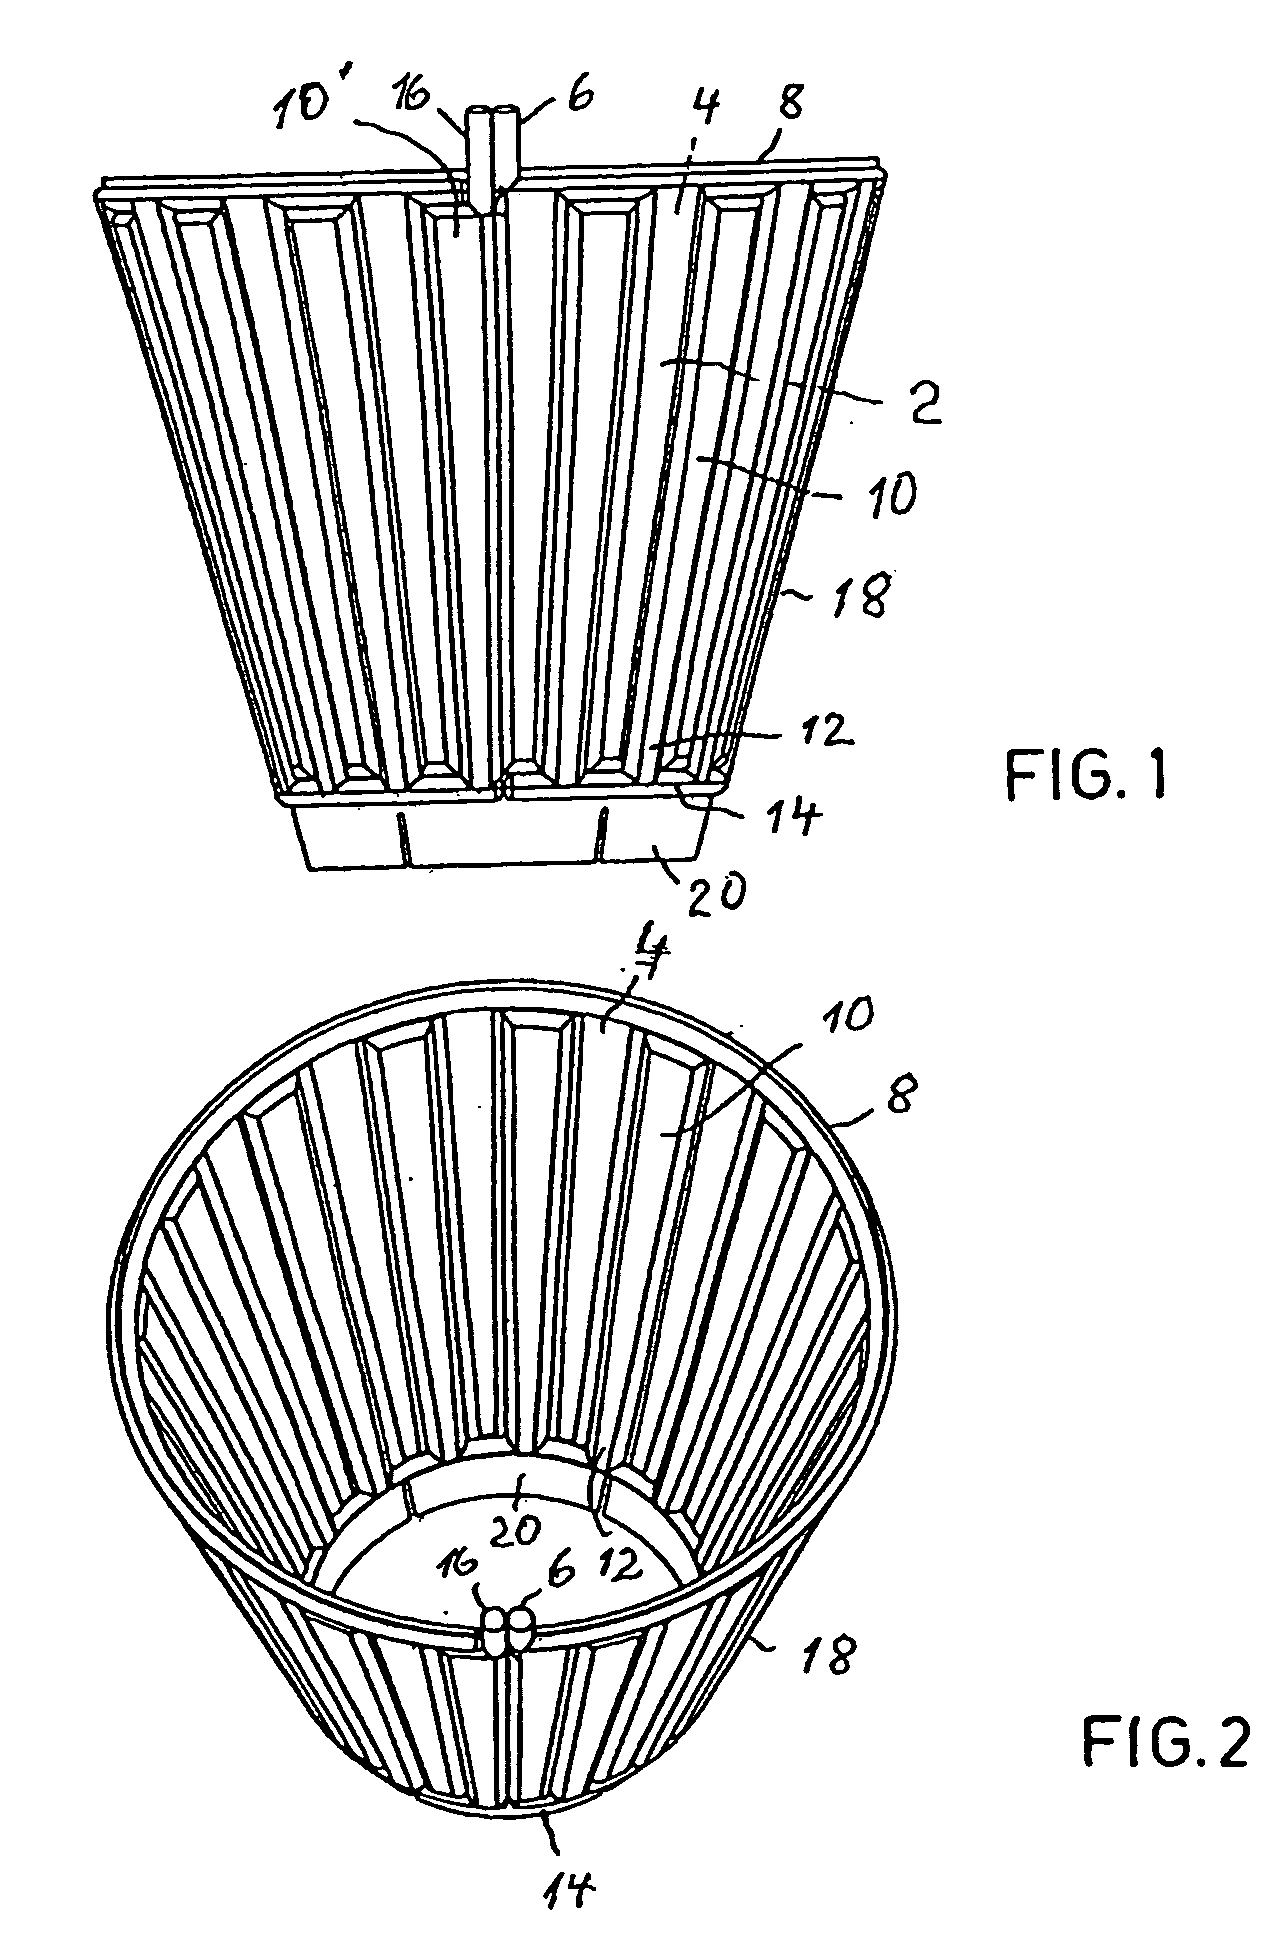 Device for supporting the abdominal wall relative to underlying organs during minimally invasive surgery